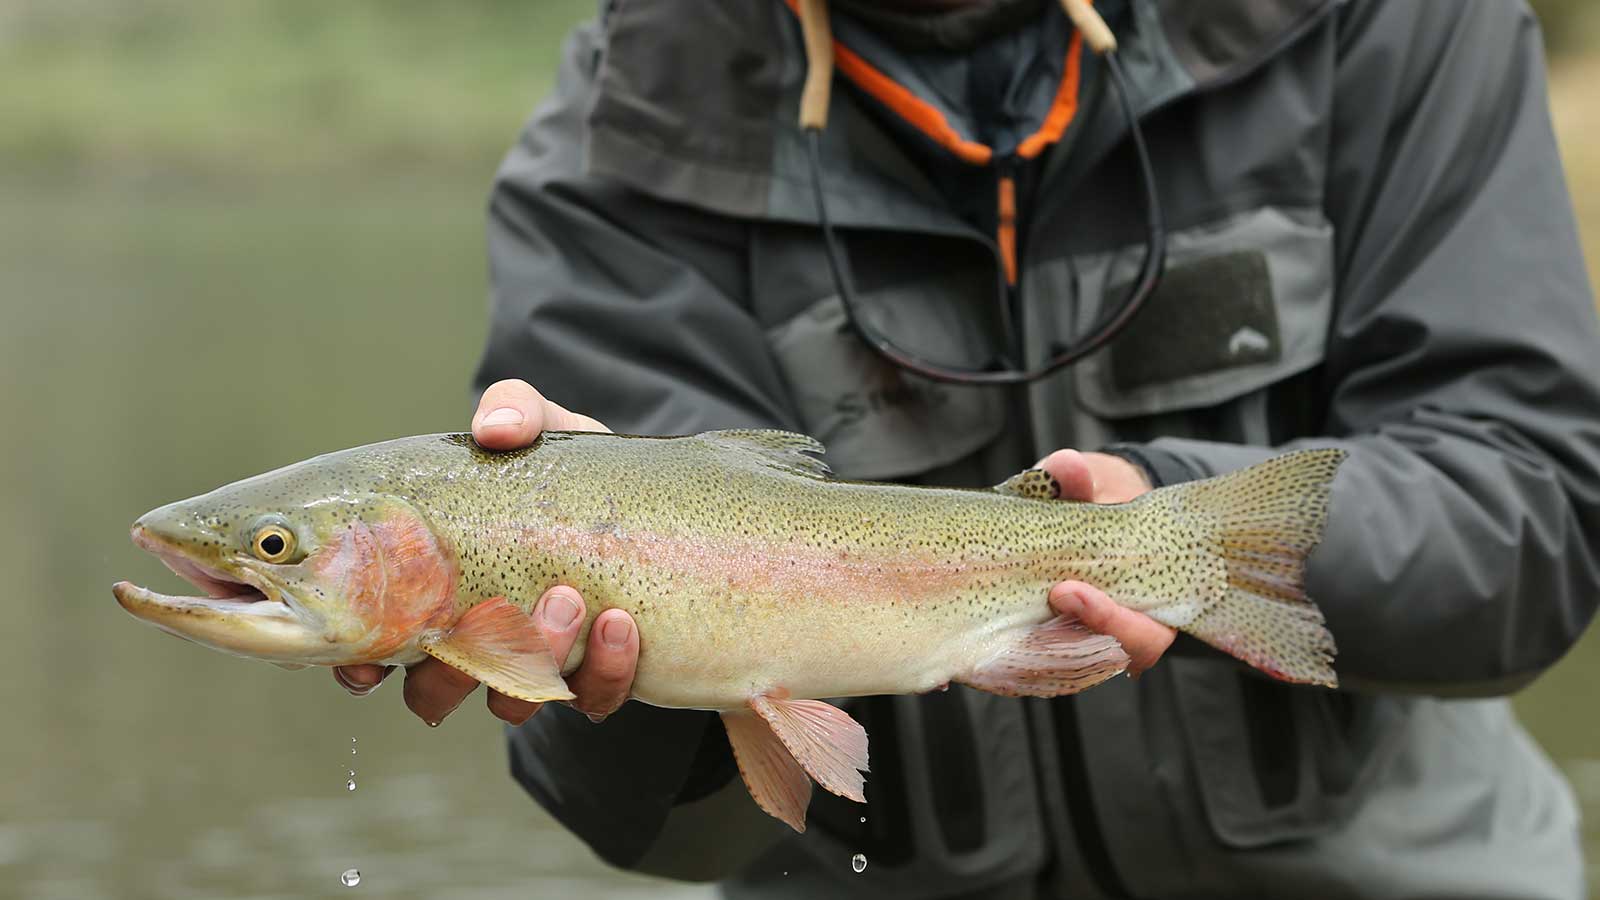 montana-fly-fishing-guides-3_opt - Montana Fly Fishing Guides